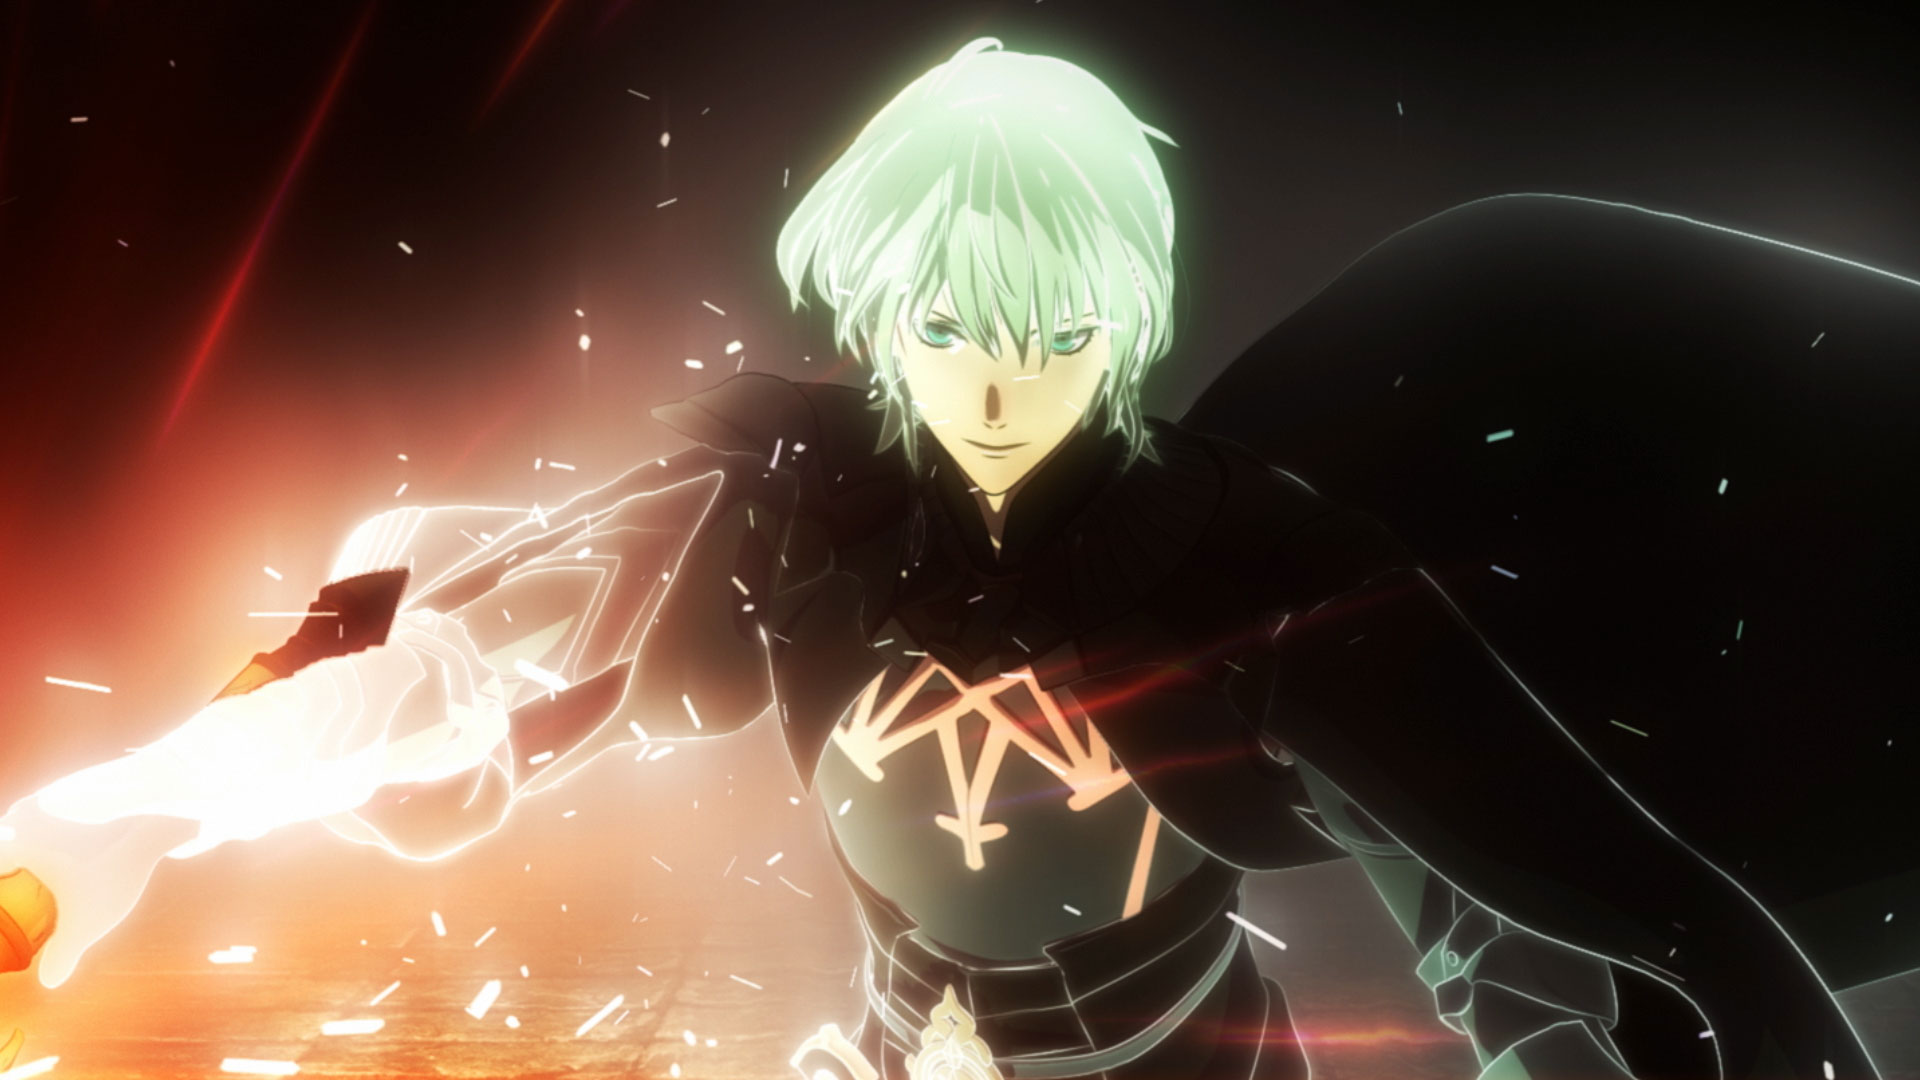 Fire Emblem, Fire Emblem: Three Houses, Fire Emblem: Three Houses Review, Intelligent Systems, Koei Tecmo Games, Nintendo, Nintendo Switch, Nintendo Switch Review, RPG, strategy, Switch Review, Tactics, turn-based, Video Game, Video Game Review